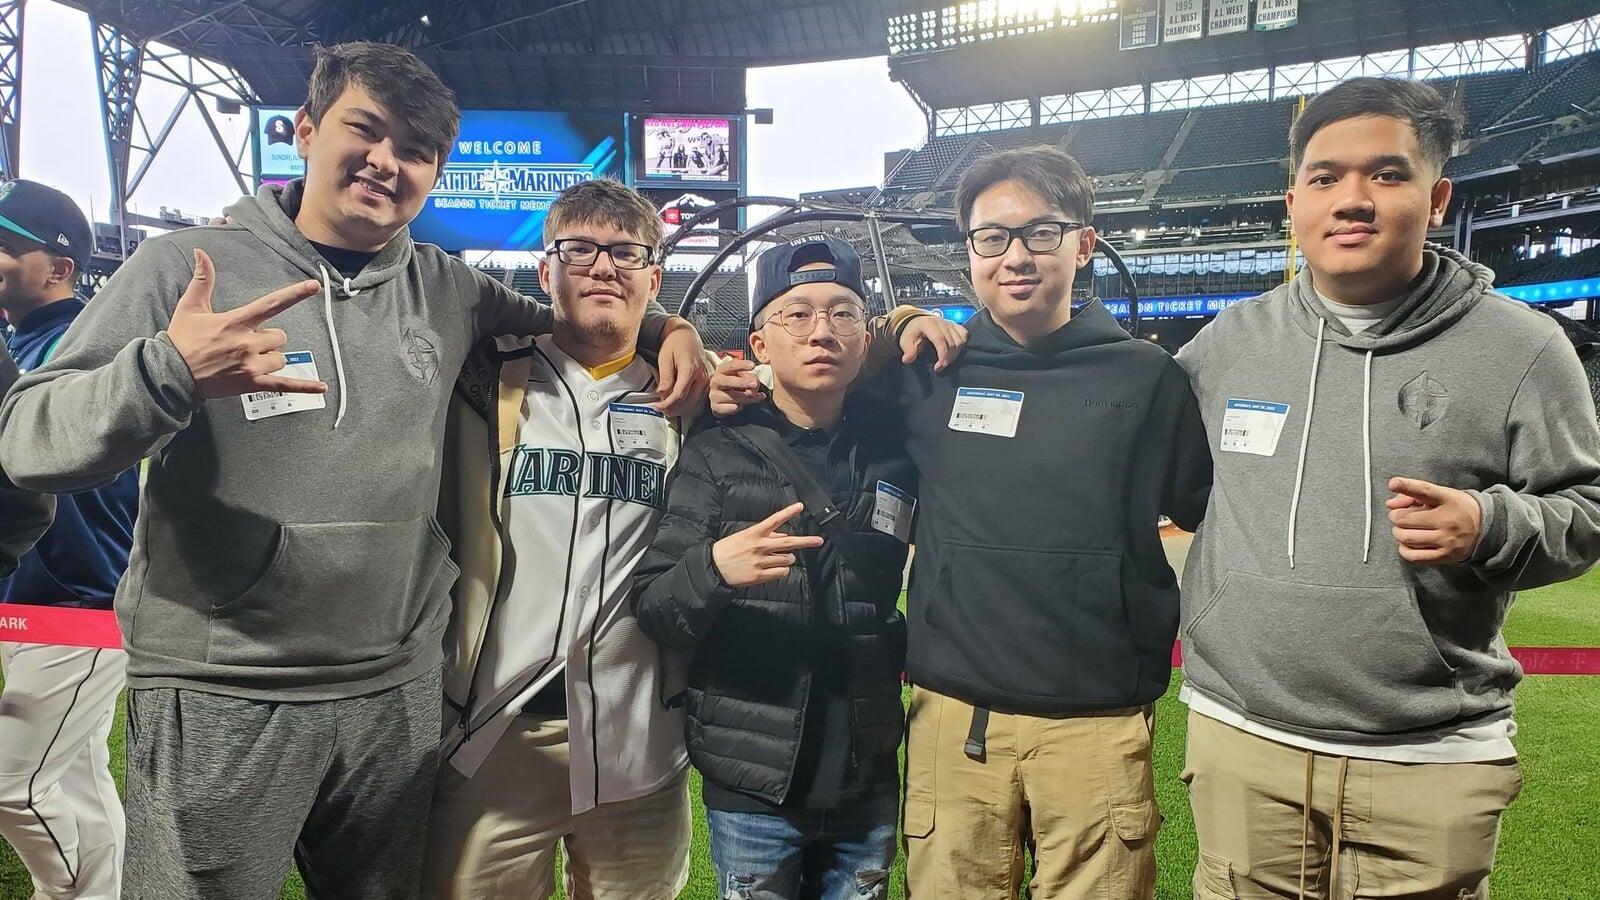 Evil Geniuses Valorant team on the Seattle Mariners field before VCT began.